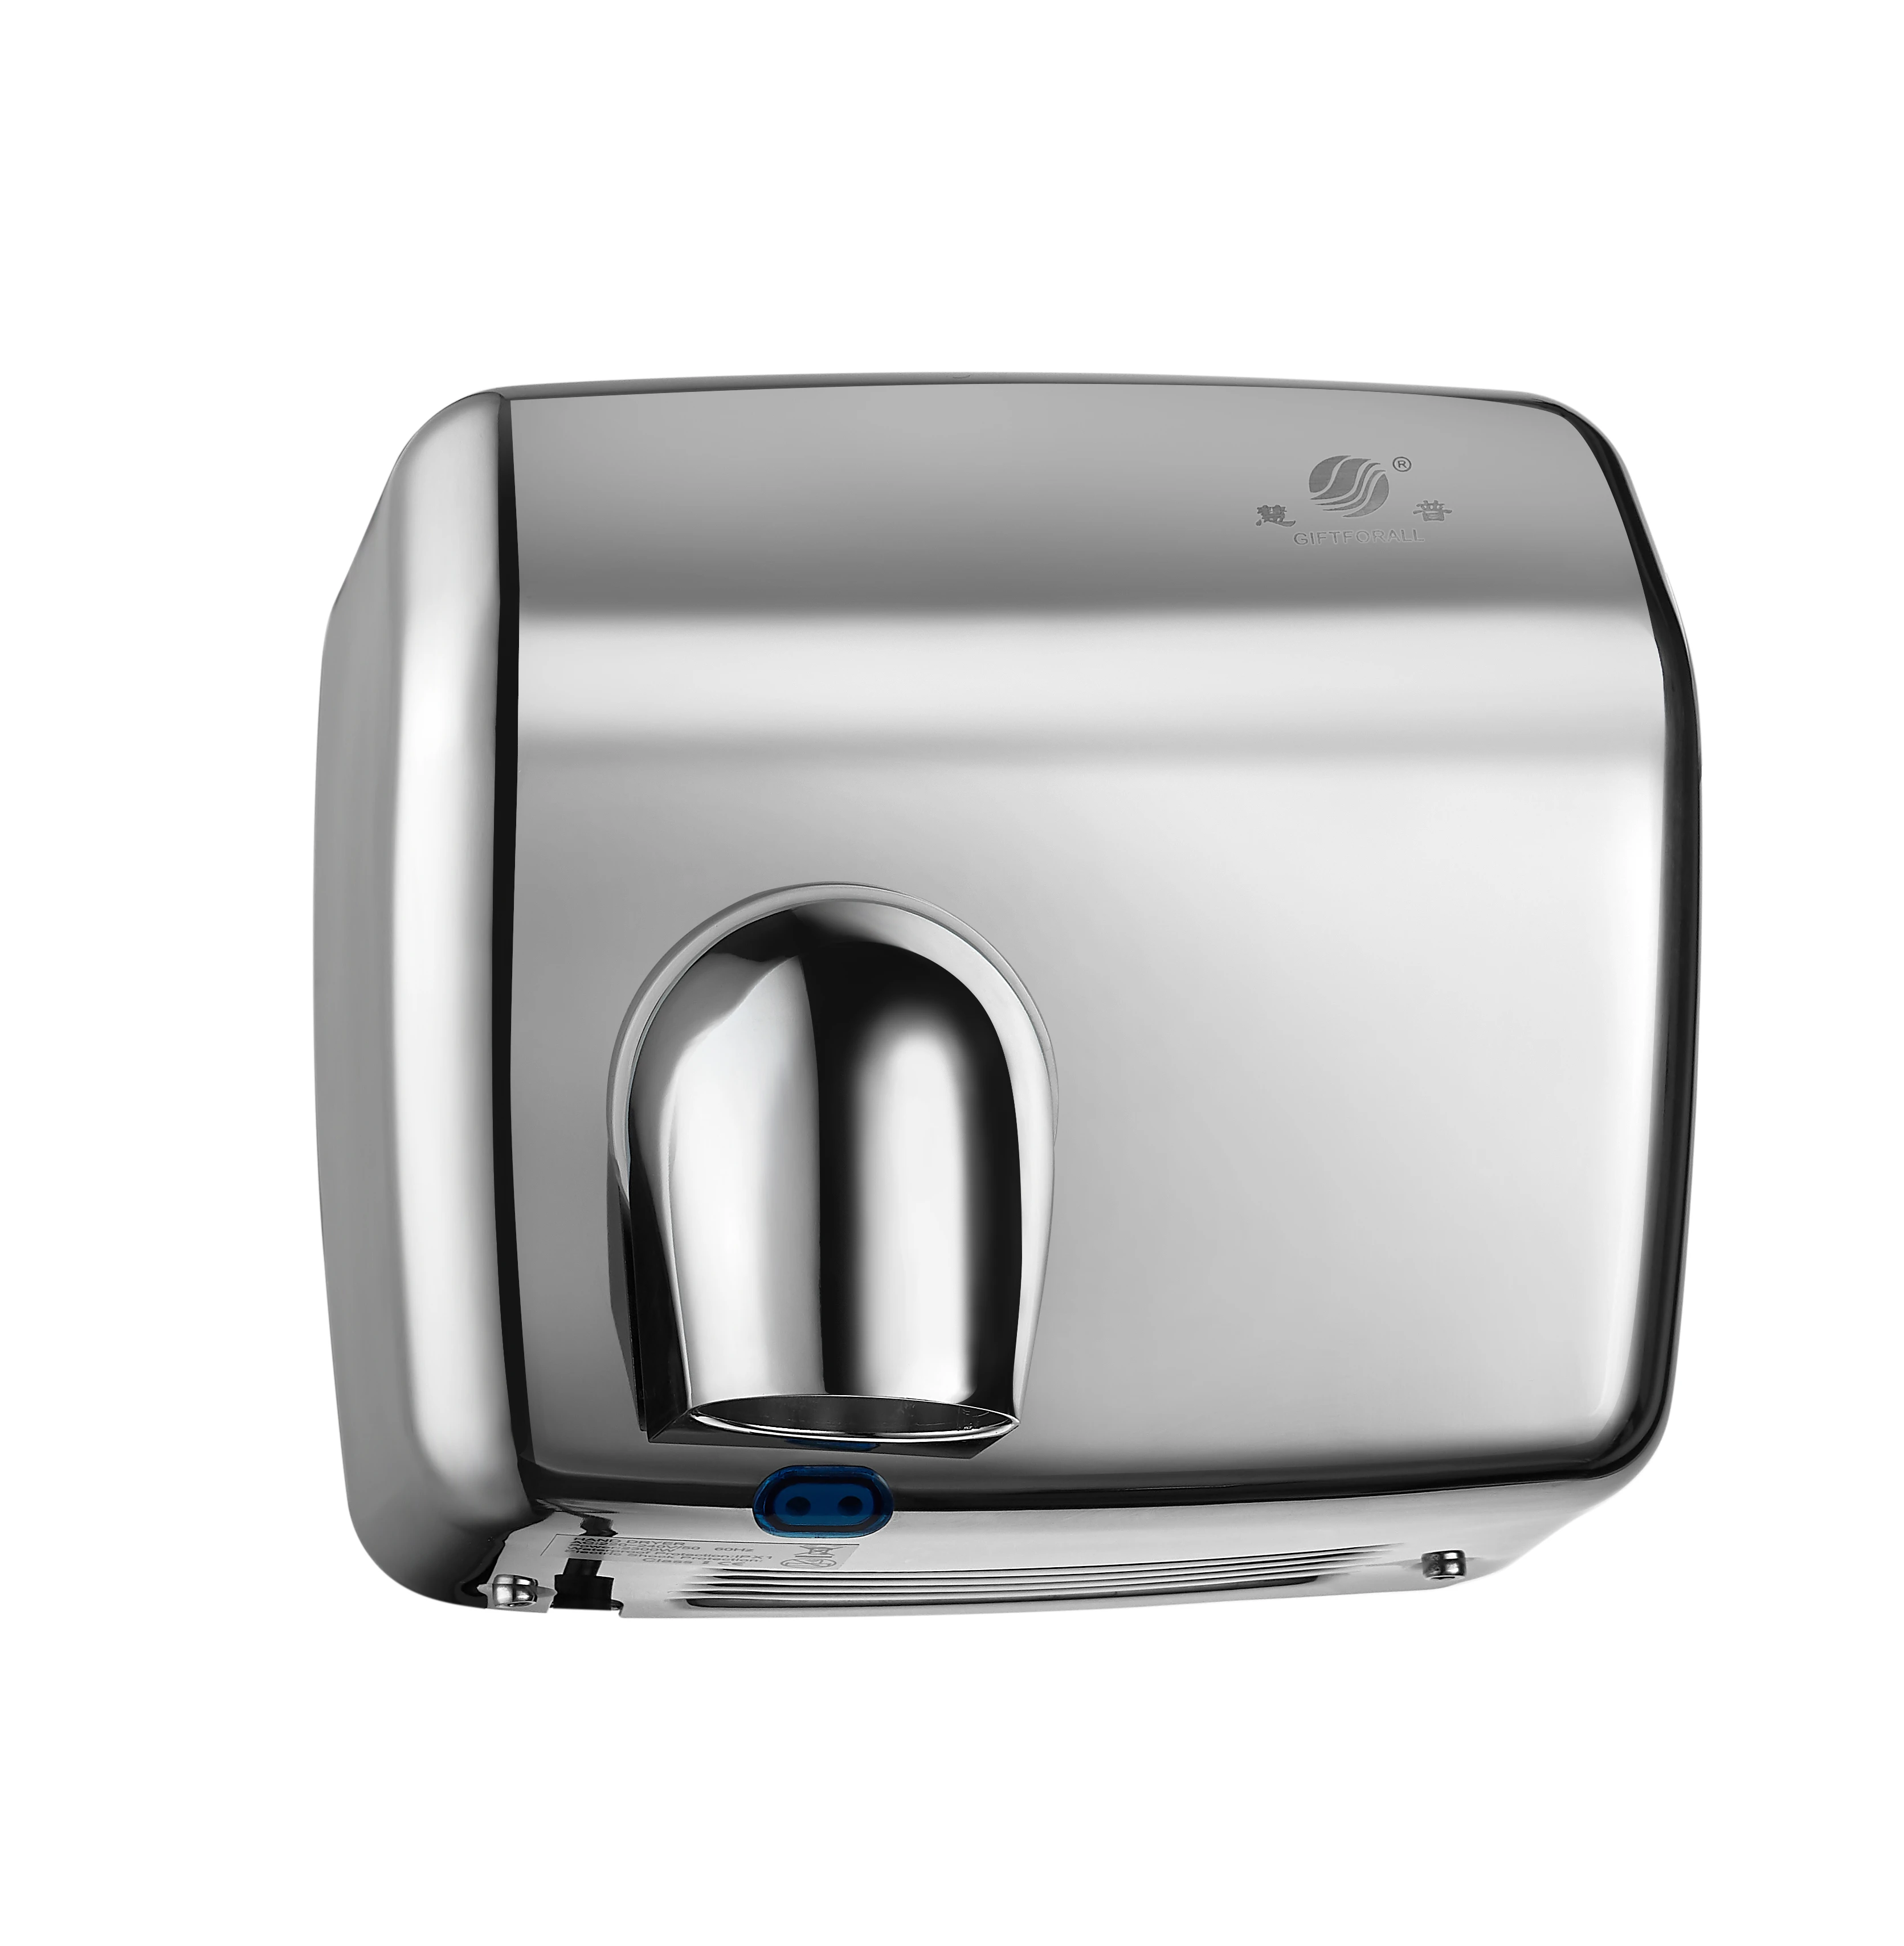 Heavy Duty Commercial 2300 Watts High Speed Automatic hot Hand Dryer - Stainless Steel, hand dryer jet,wall mounted hand dryer